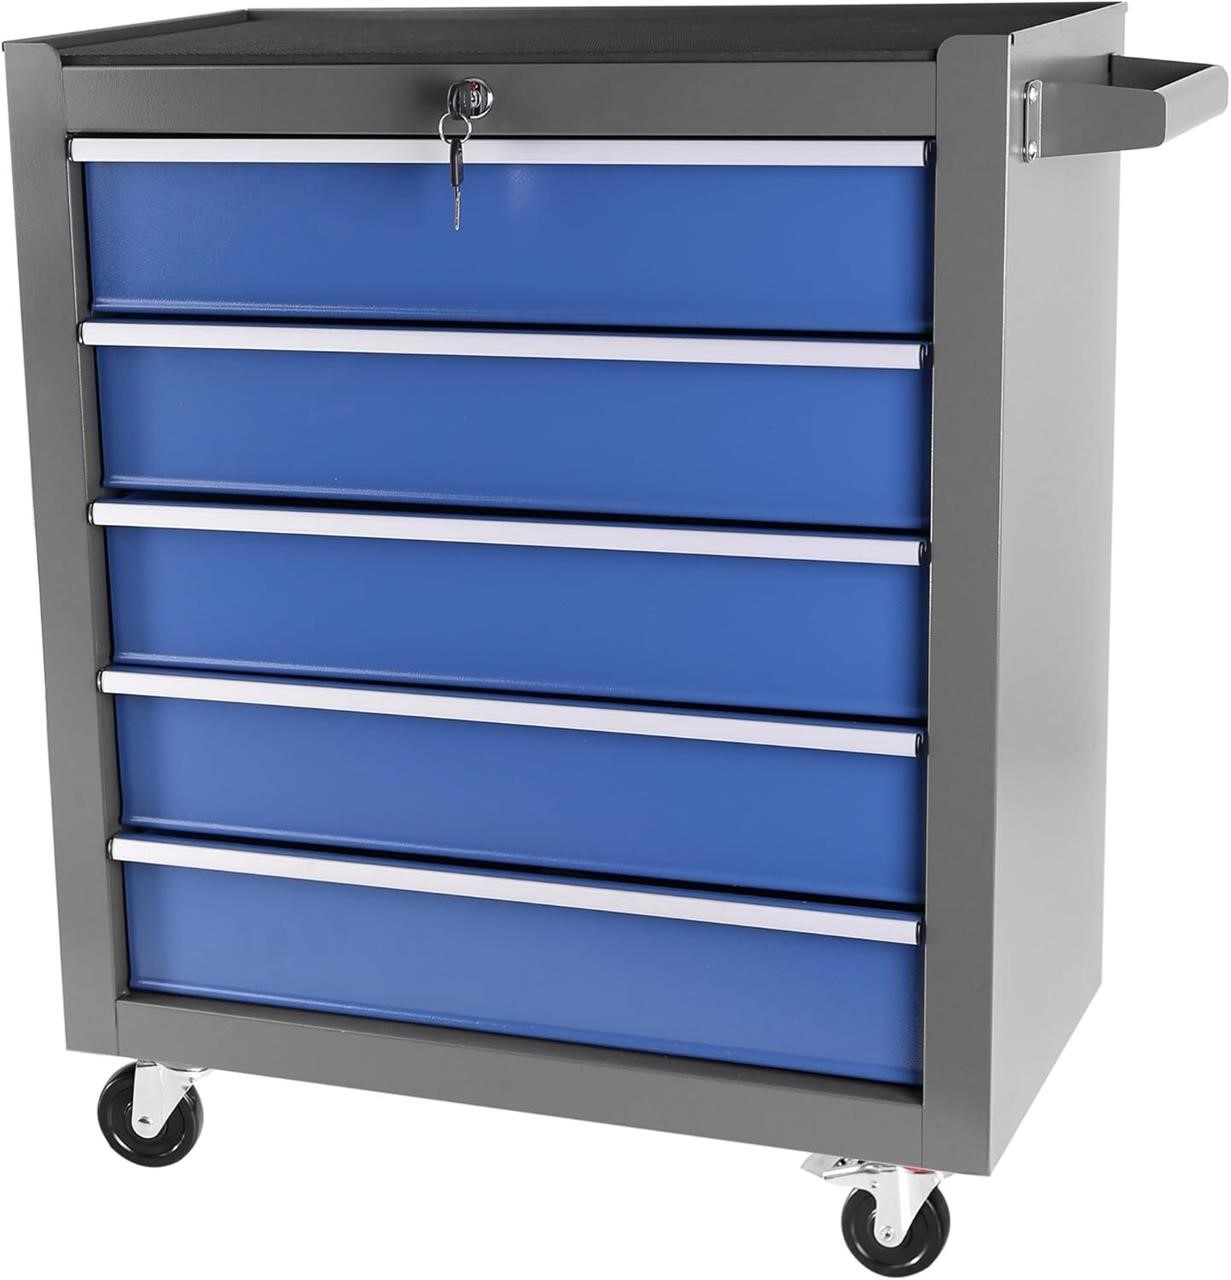 5 Drawers Rolling Tool Chest (Blue&grey)